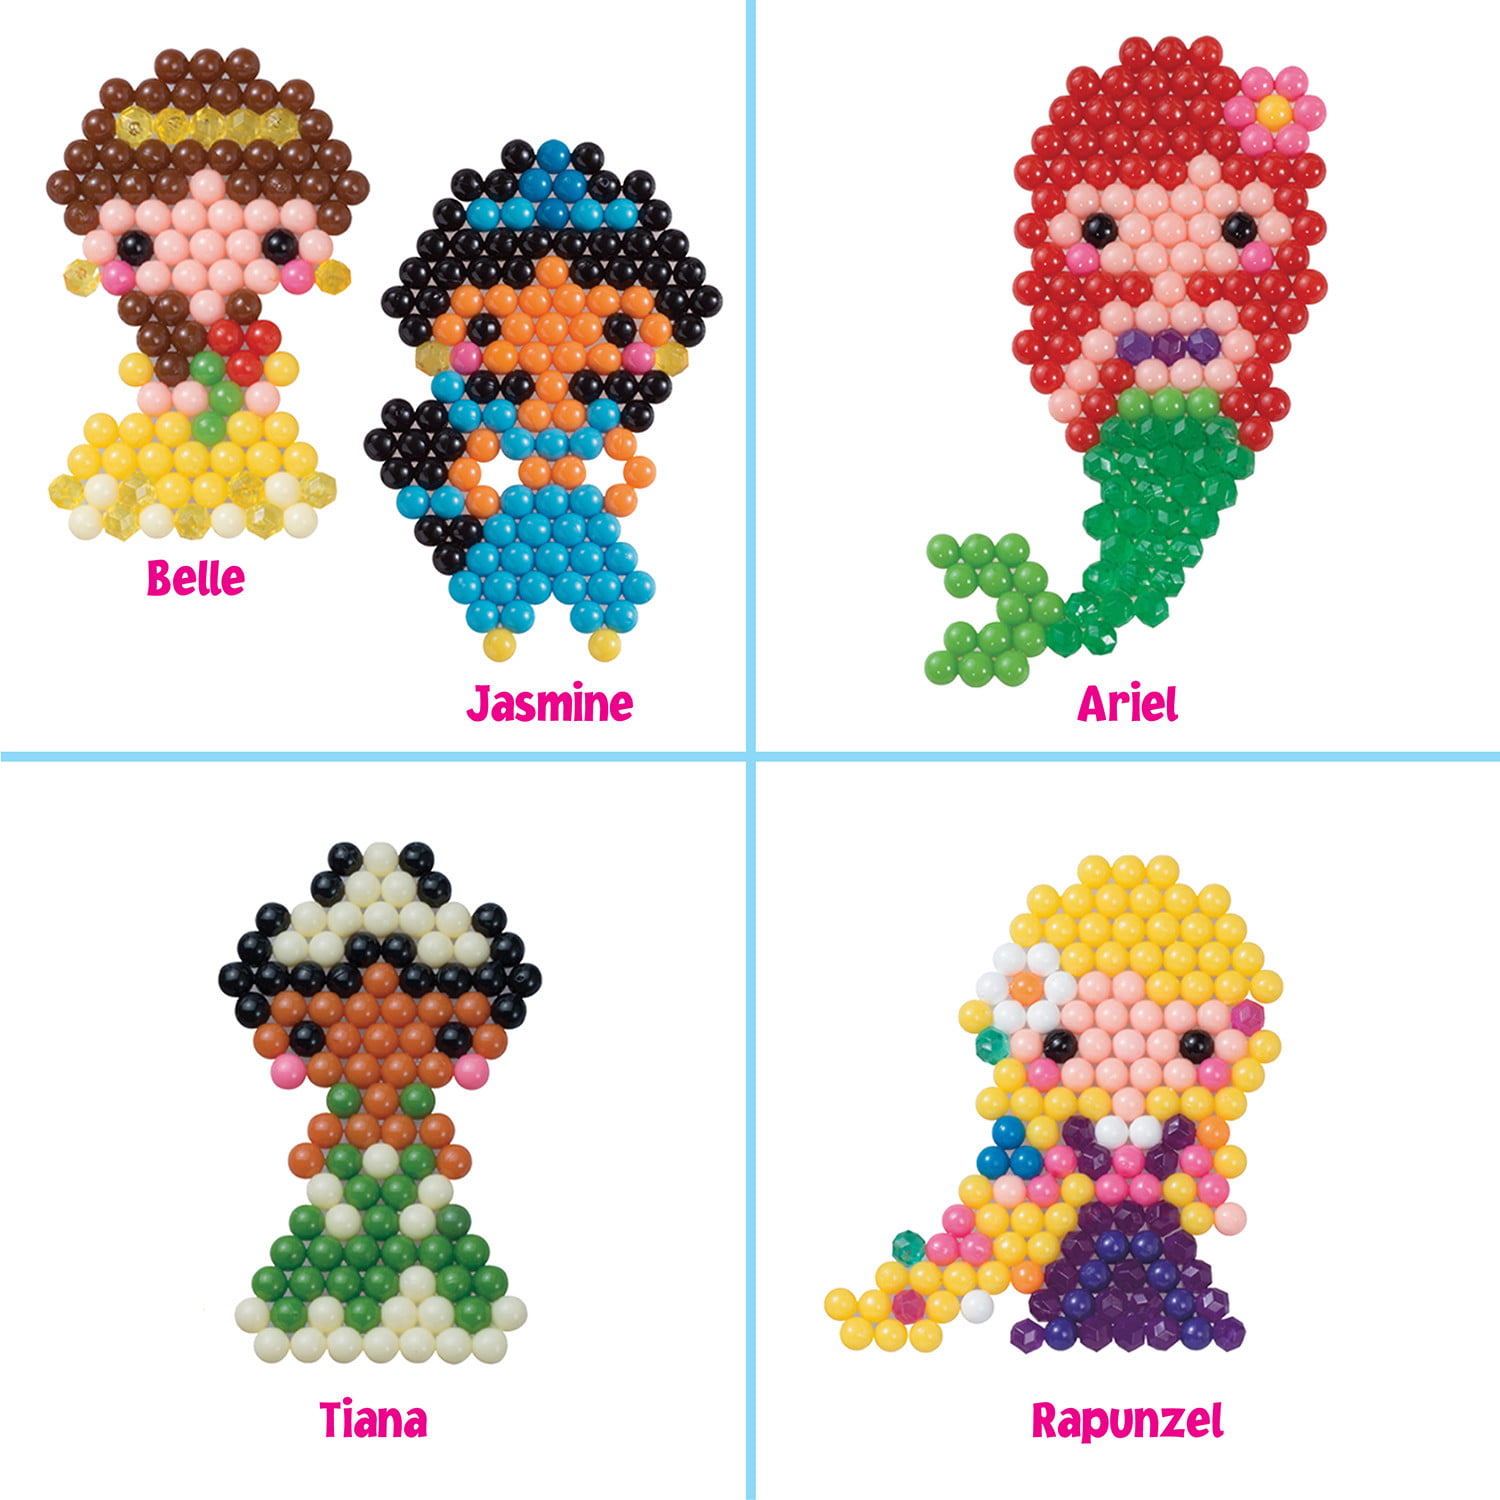 Aquabeads Disney Princess Character Gift Set with Pen, Aqua Beads Extra  Refills and Five Stands- Hours of Magical Fun : : Toys